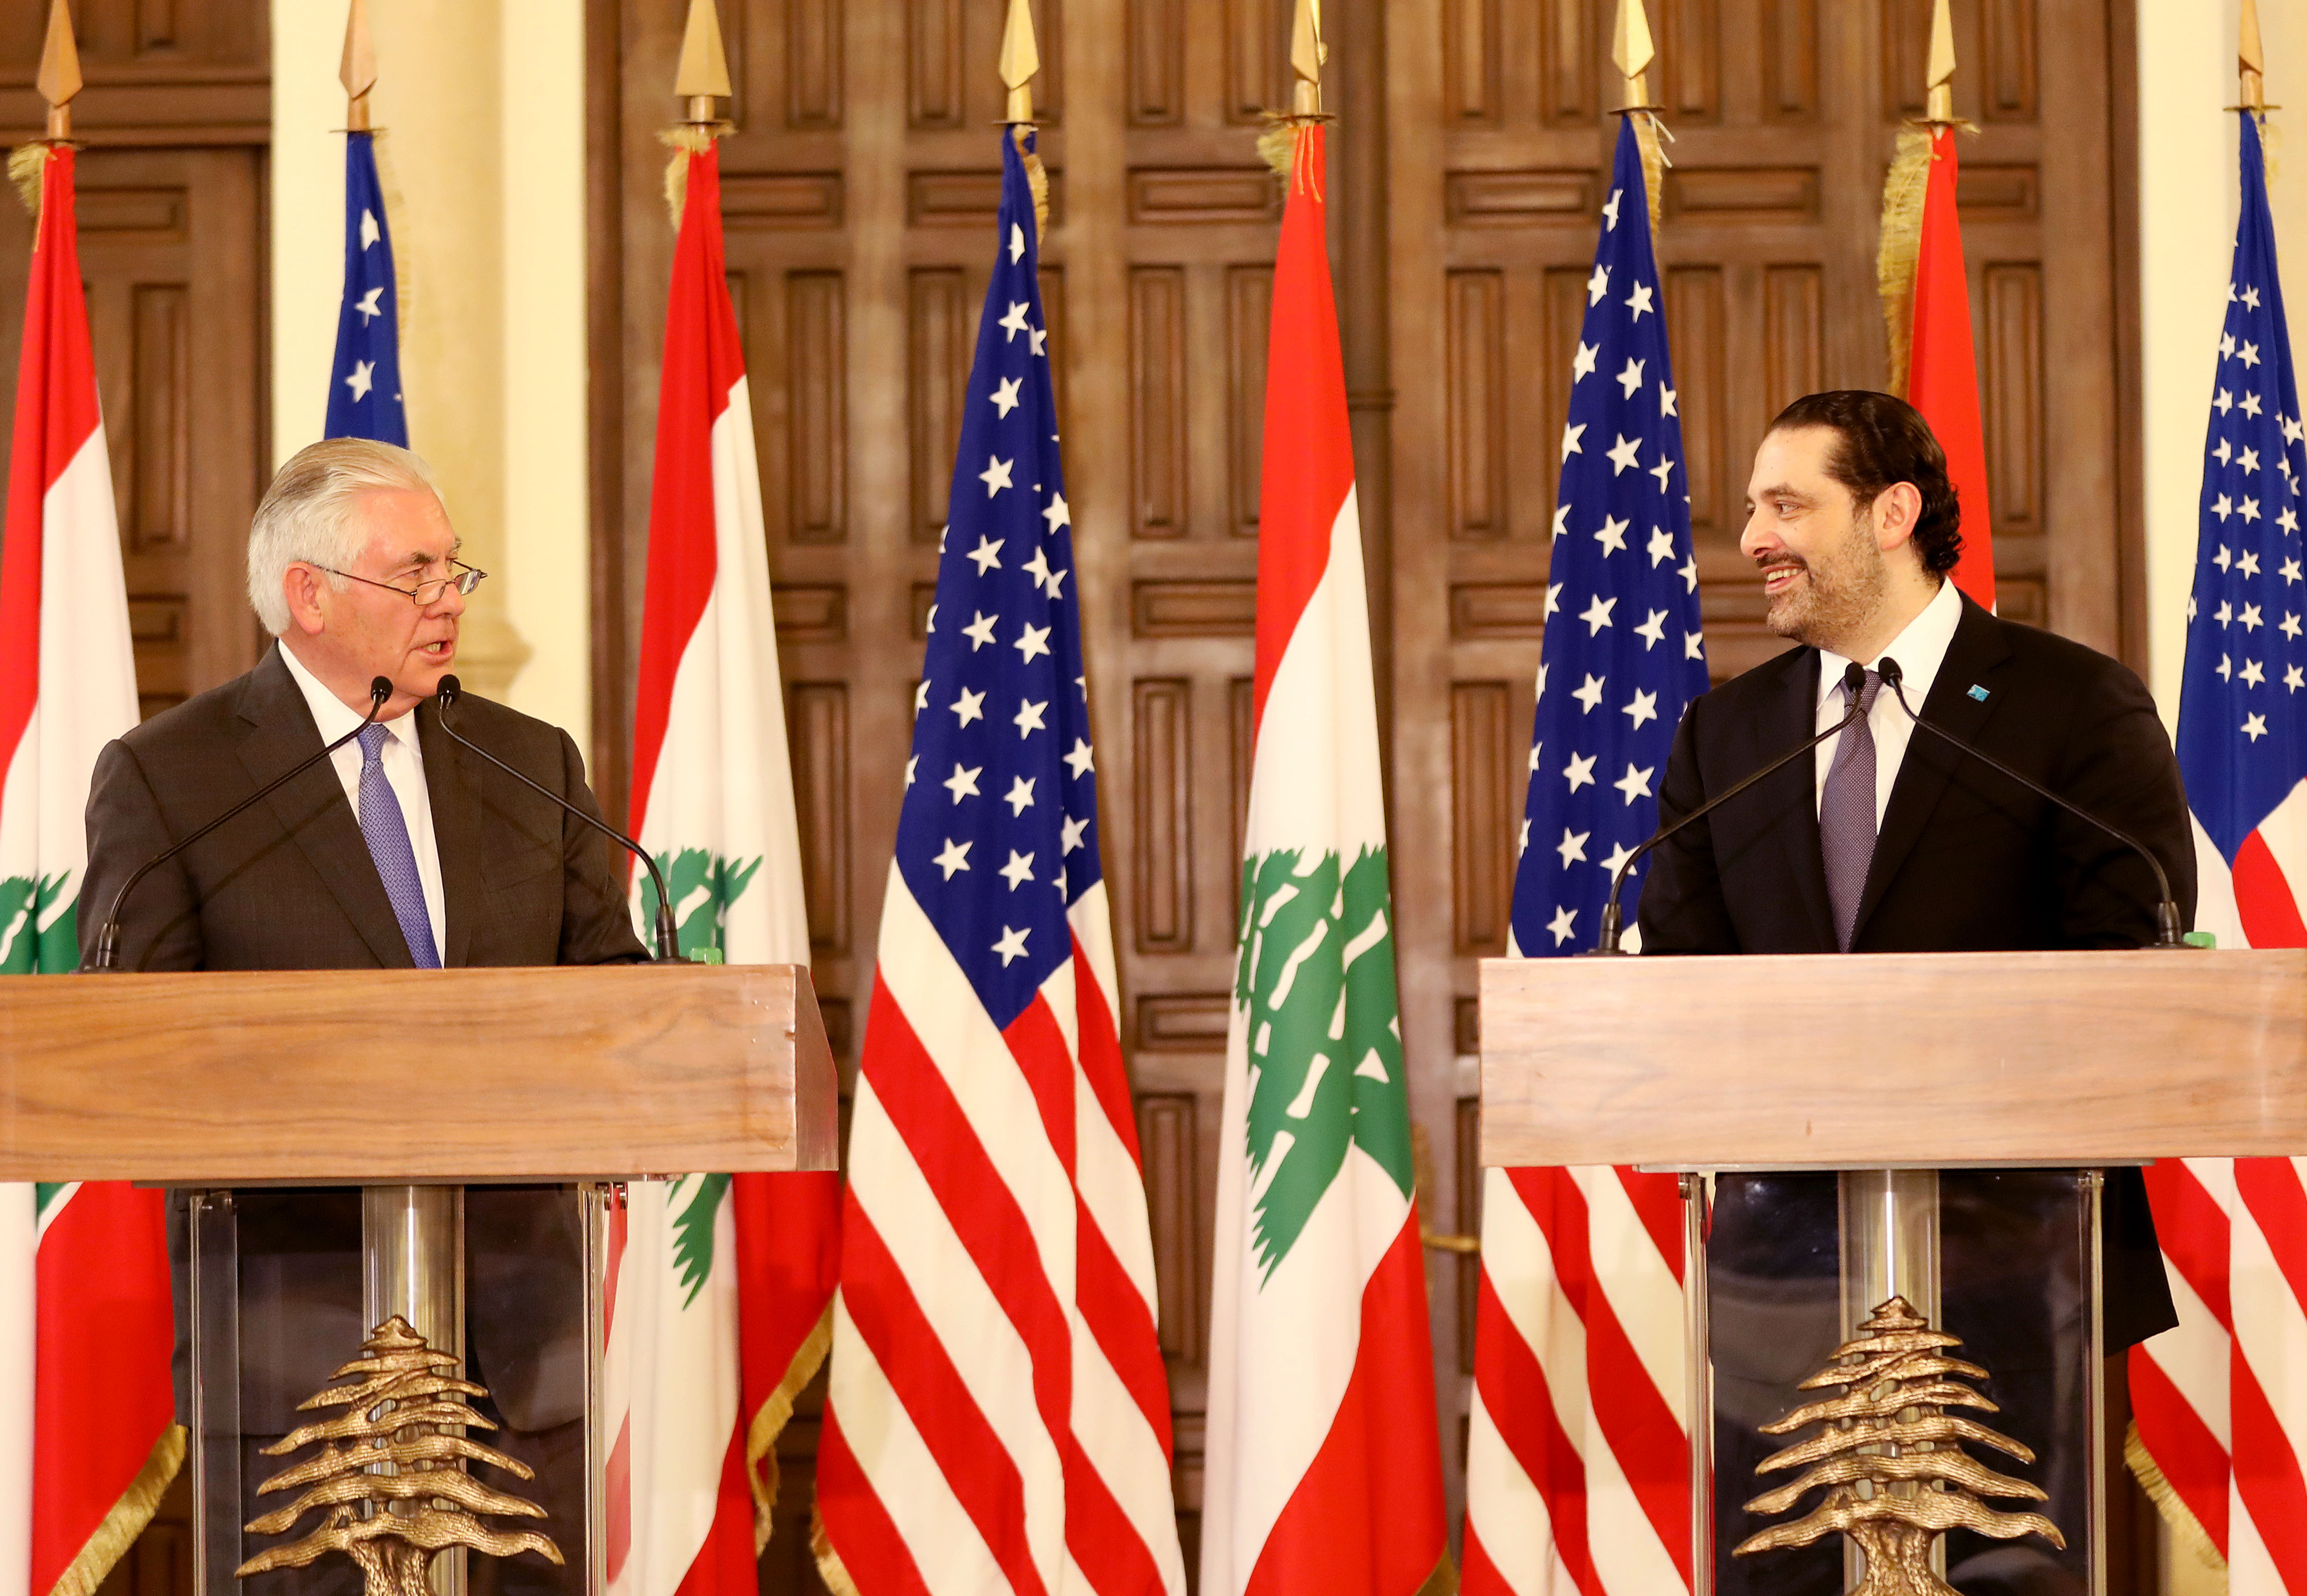 US Secretary of State Rex Tillerson in a joint press conference with Lebanese Prime Minister Saad Al-Hariri